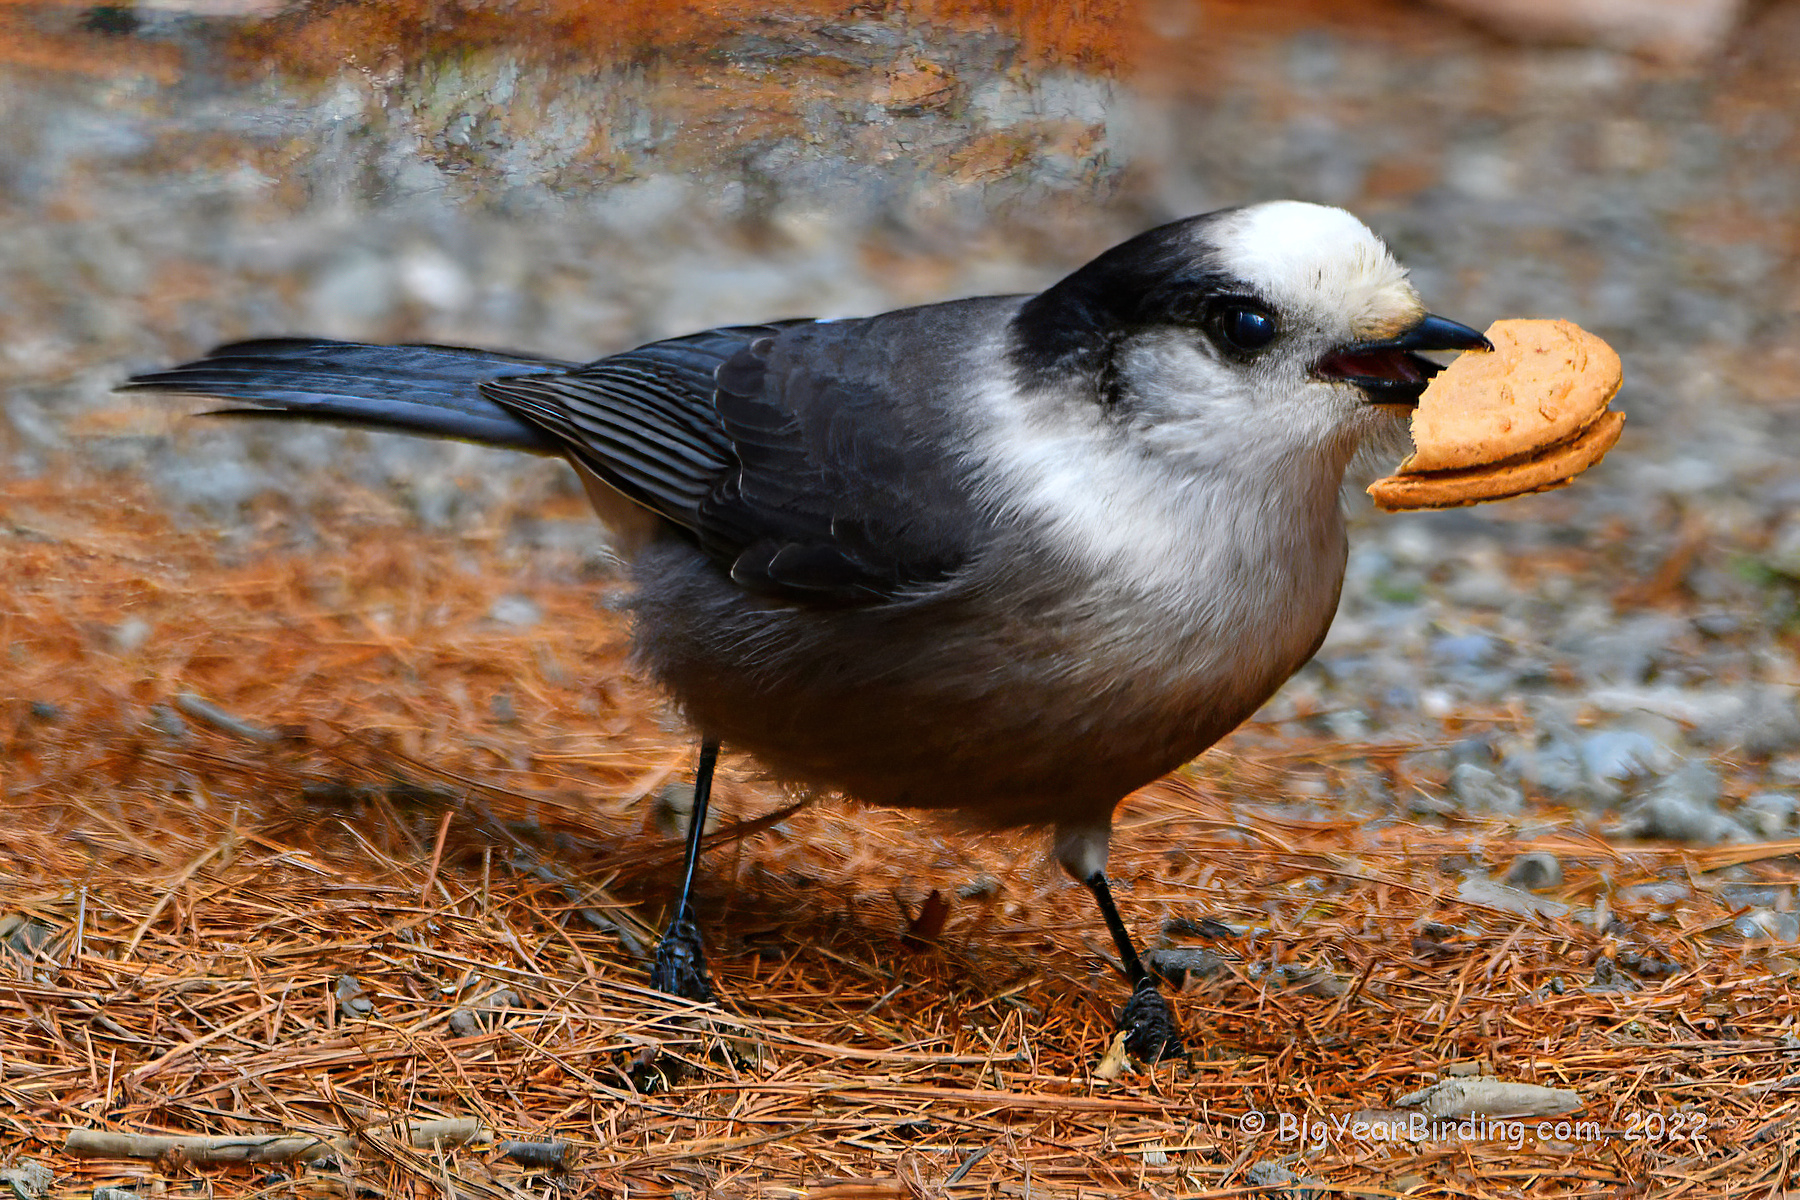 Canada Jay – the Clown of the Boreal Forest